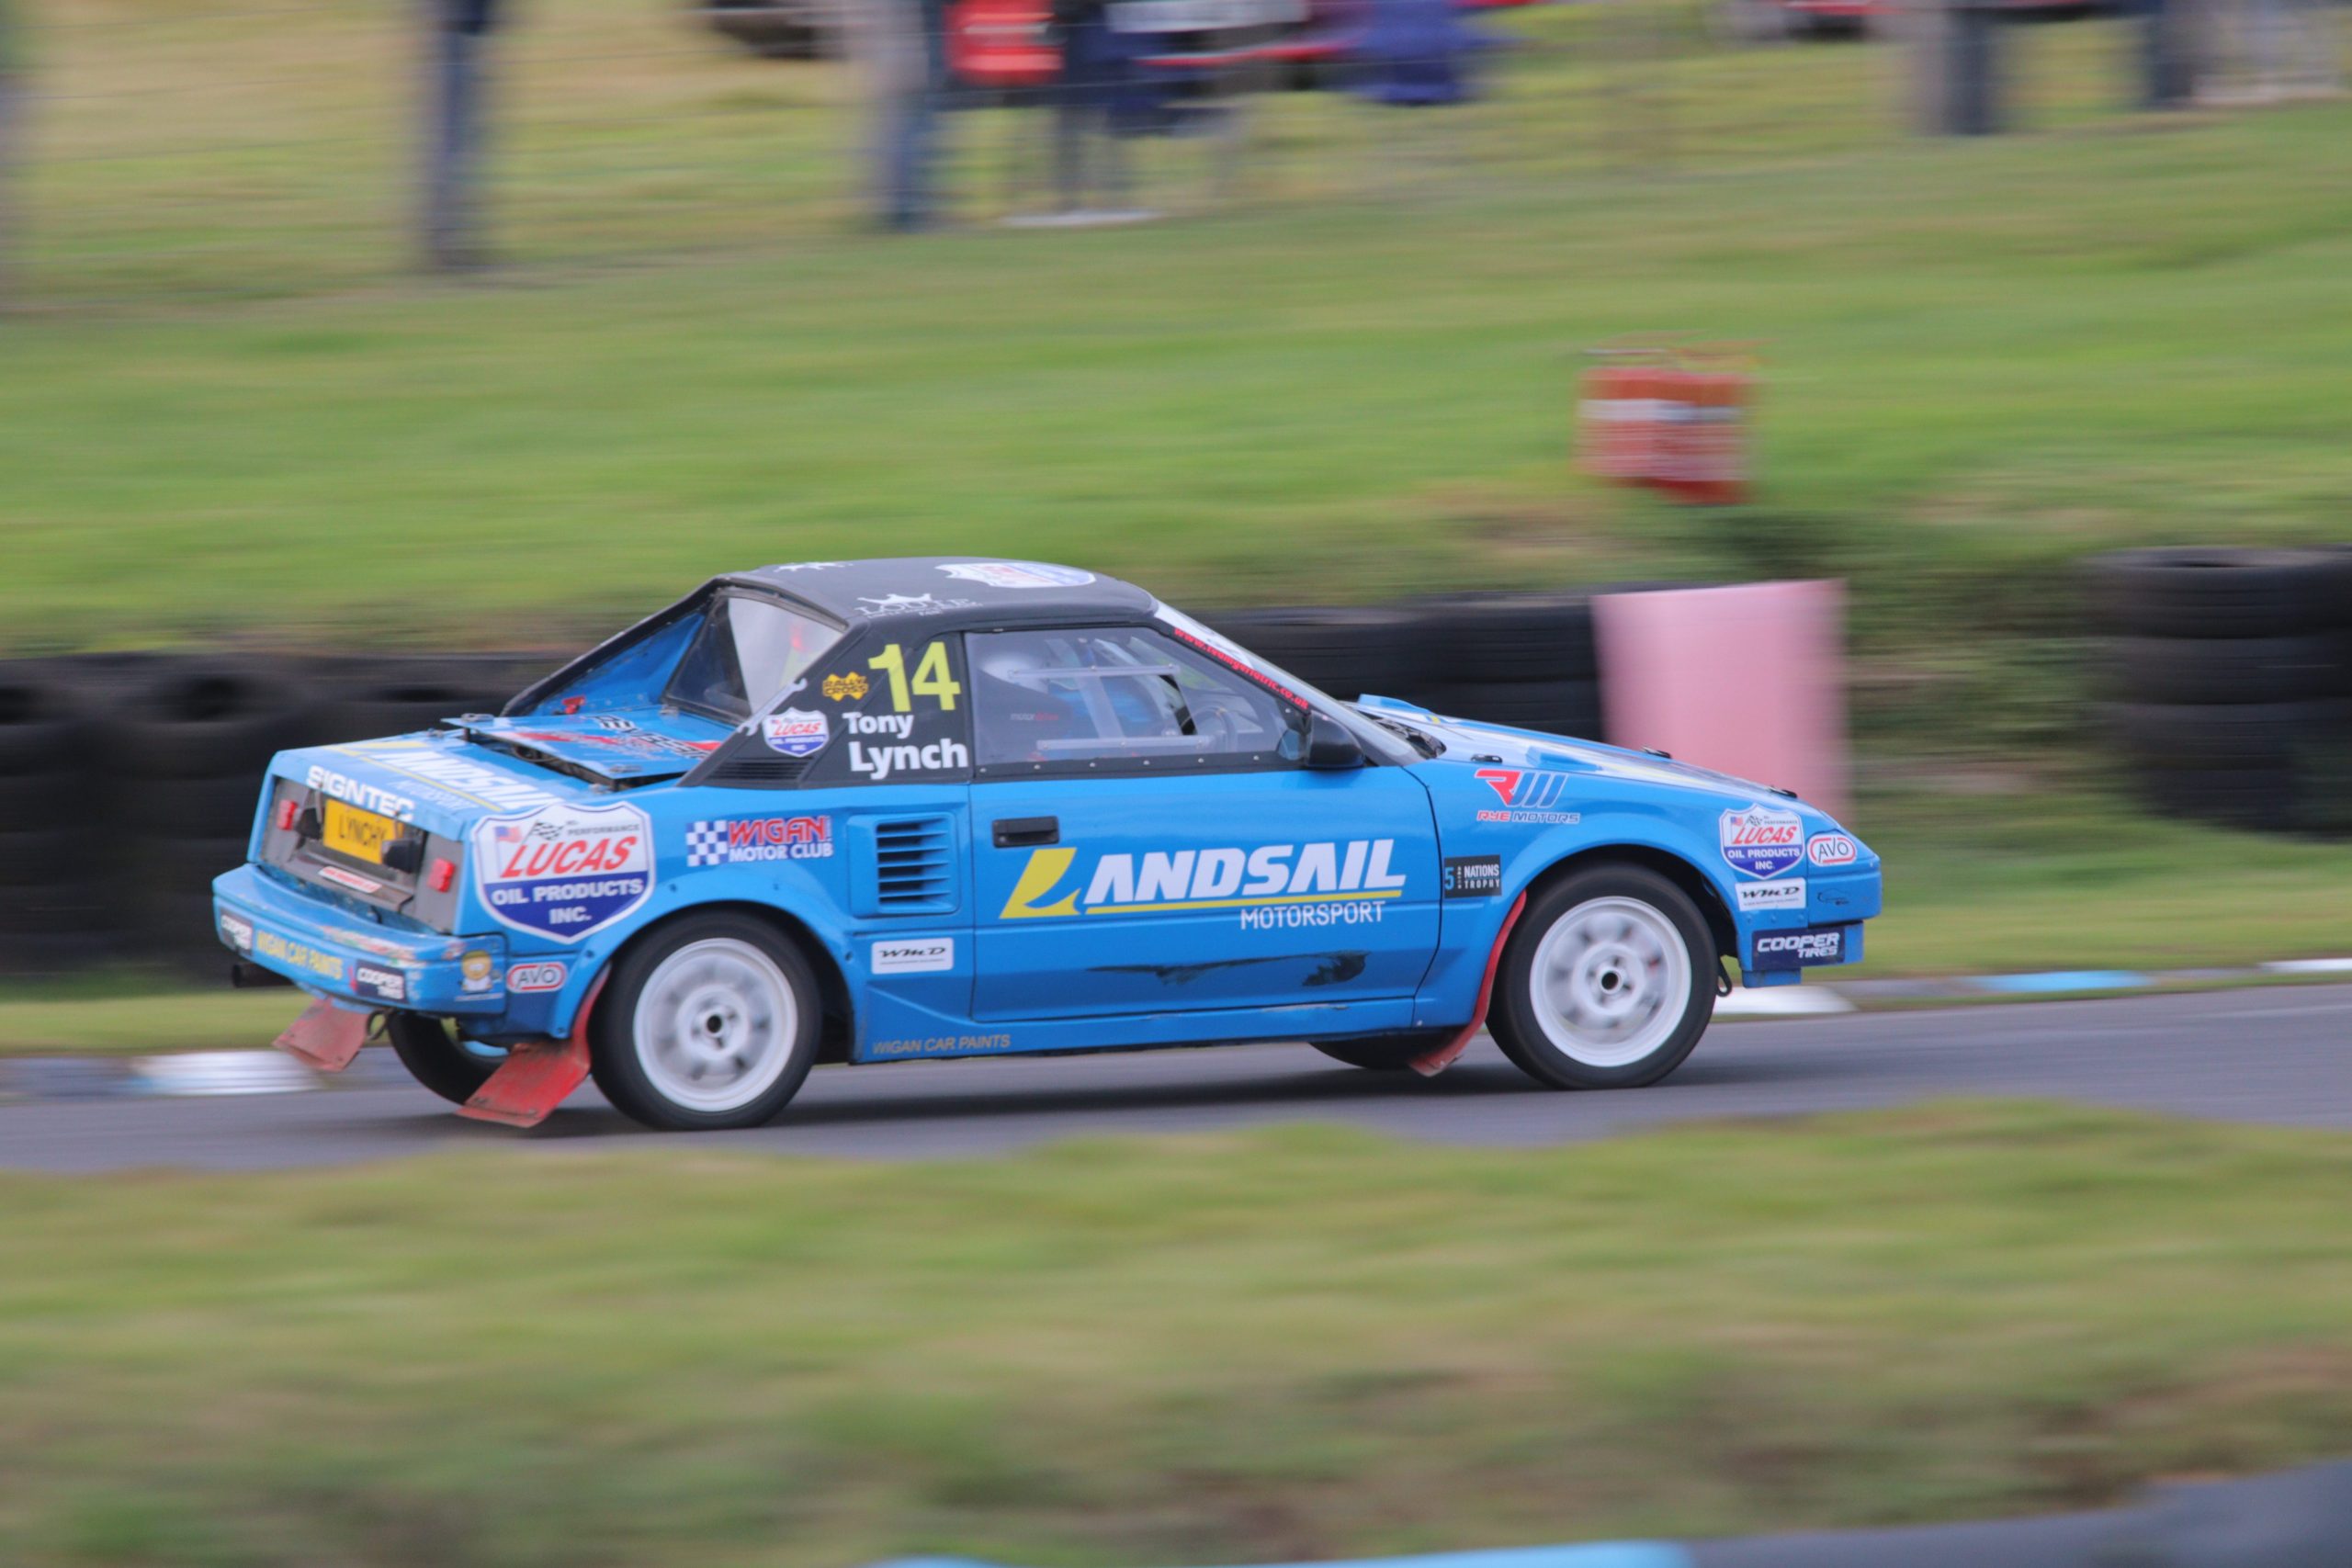 Landsail Team Geriatric goes close in Lydden Hill finale